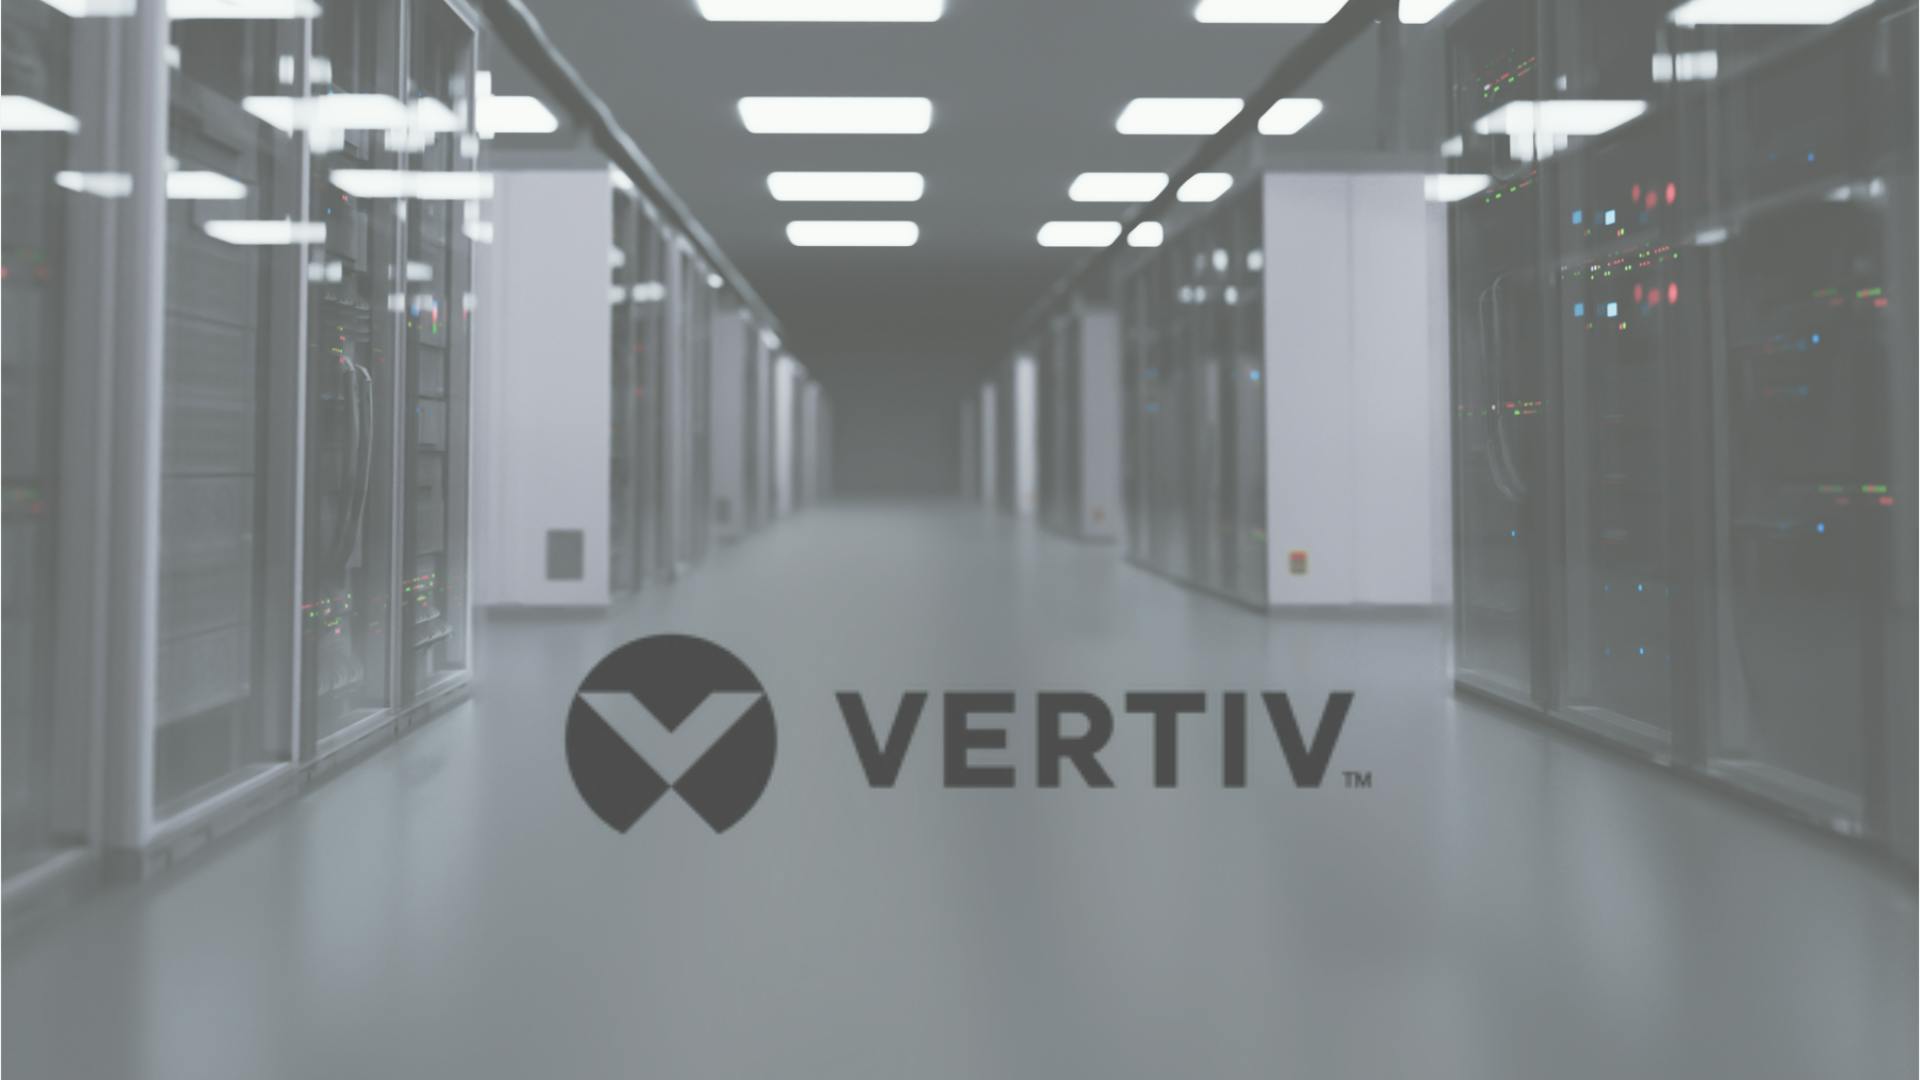 Vertiv Joins the SDIA to Help Drive a Climate-Neutral Digital Economy